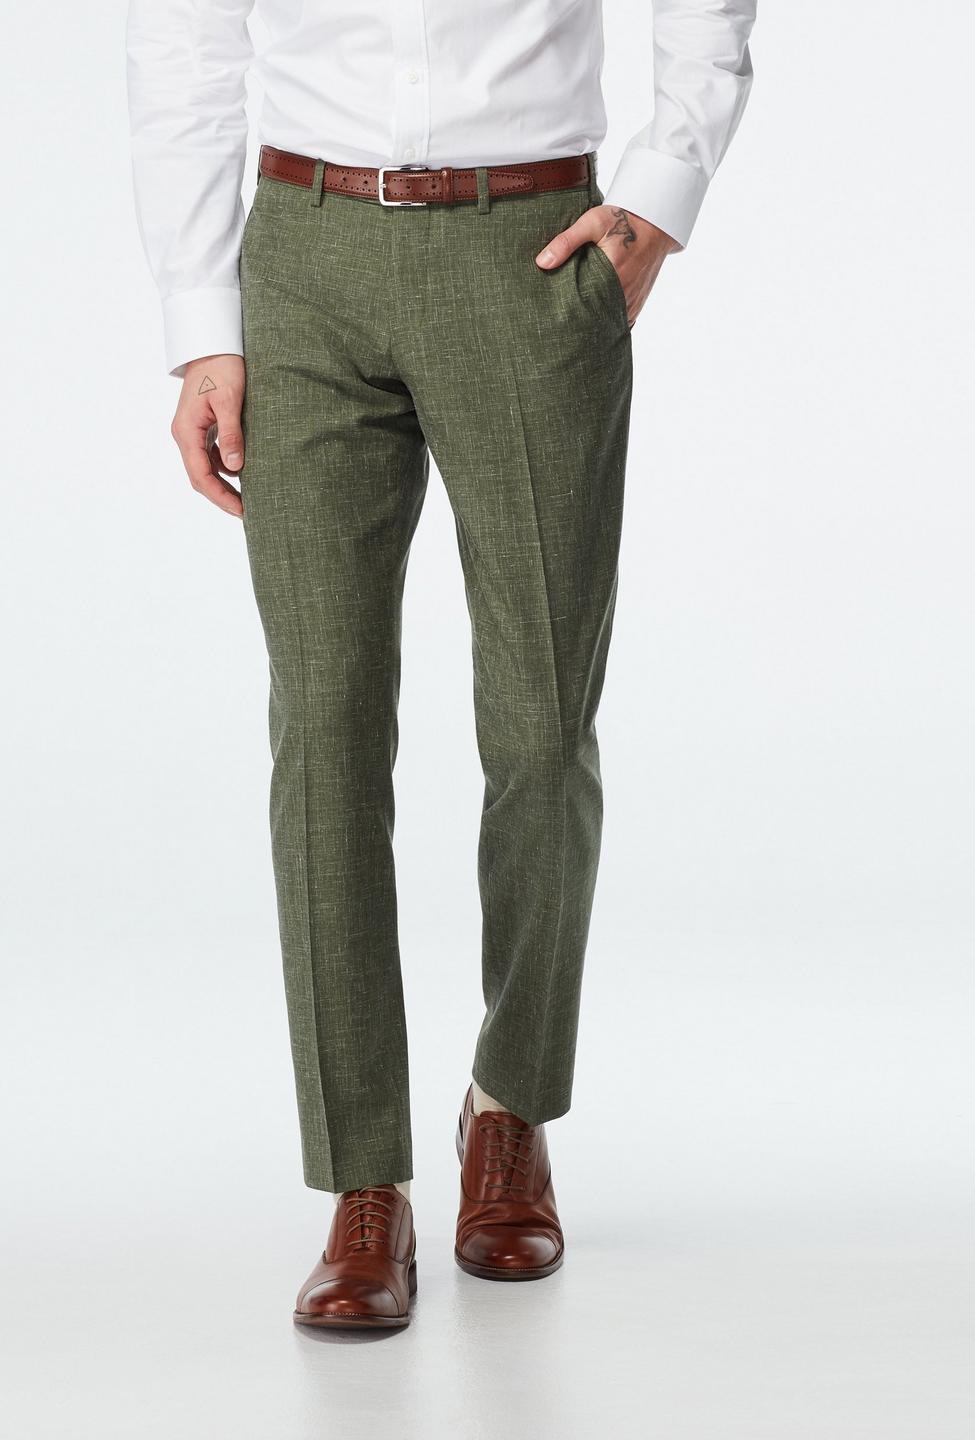 Stockport Wool Linen Olive pants